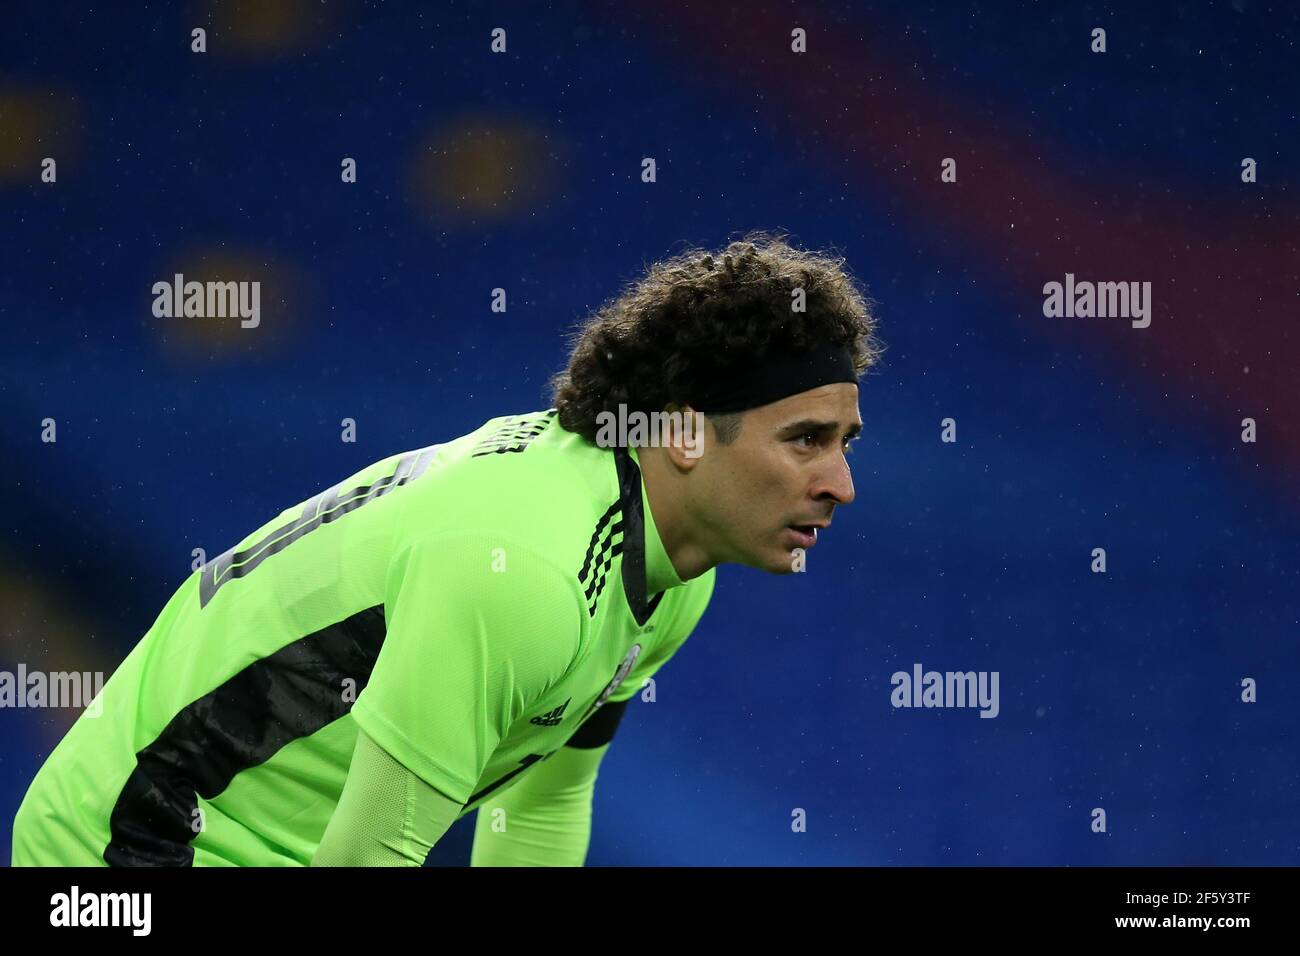 Cardiff, UK. 27th Mar, 2021. Guillermo Ochoa, the goalkeeper of Mexico looks on. Football international friendly match, Wales v Mexico, at the Cardiff city stadium in Cardiff, South Wales on Saturday 27th March 2021. Editorial use only. pic by Andrew Orchard/Andrew Orchard sports photography/Alamy Live News Credit: Andrew Orchard sports photography/Alamy Live News Stock Photo